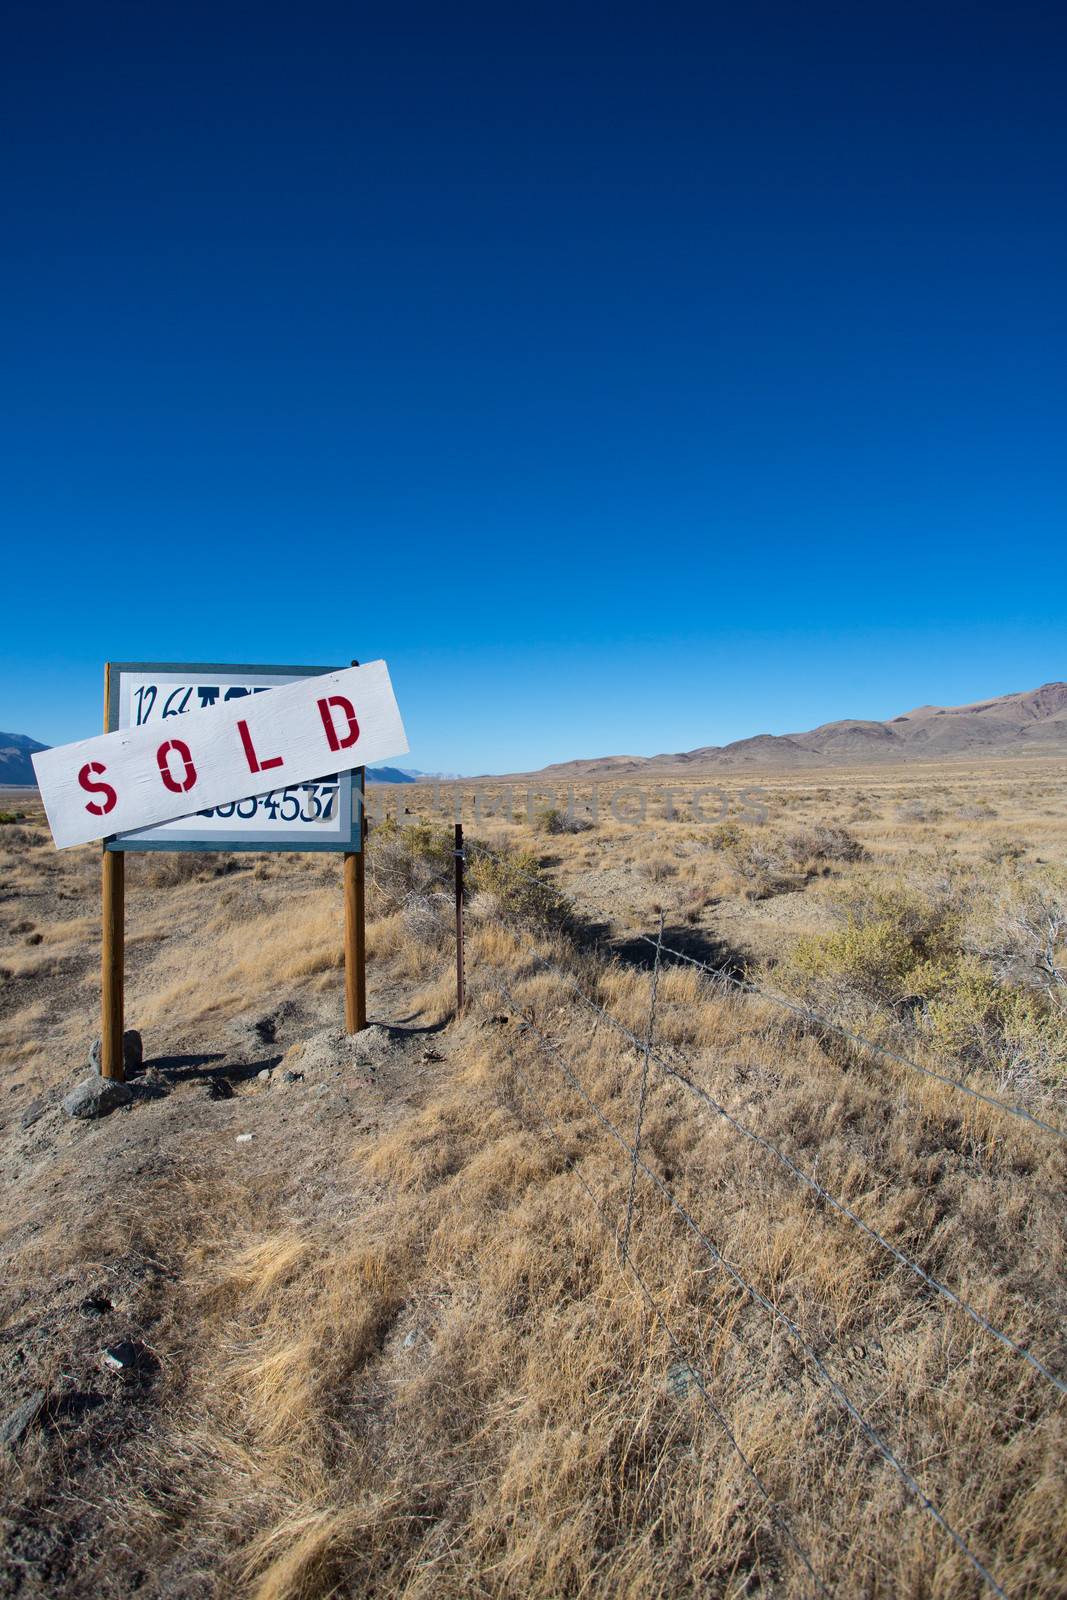 Sign board saying a farm land has been sold in the desert of nevada with a clear blue sky in the background, USA 2013.